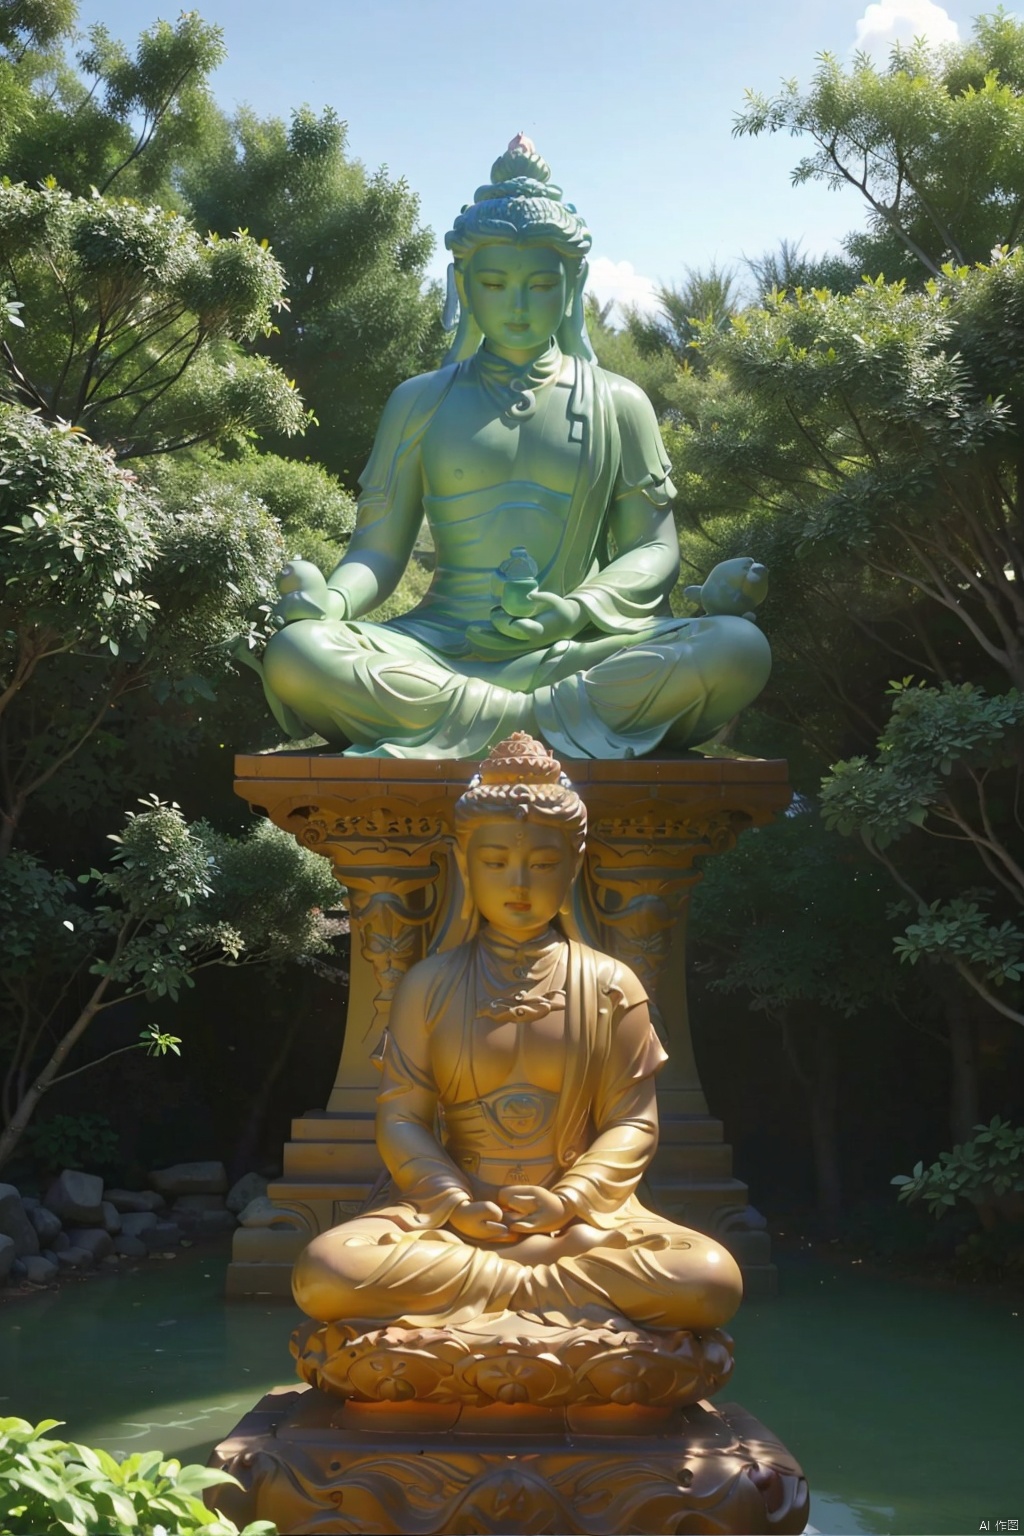 Astral Meditation Garden:Giant ancient chinese statues,His vastness surpasses all buildings, Discover a serene garden designed for deep meditation and reflection. The garden is adorned with ancient symbols and statues representing celestial beings. Soft incense fills the air, enhancing the senses and promoting a state of inner peace. Sit among the intricate patterns etched in the ground and let the harmonious energy of the garden guide you on a journey of self-discovery., Giant Clan, GTS,qinghuaci, glaze